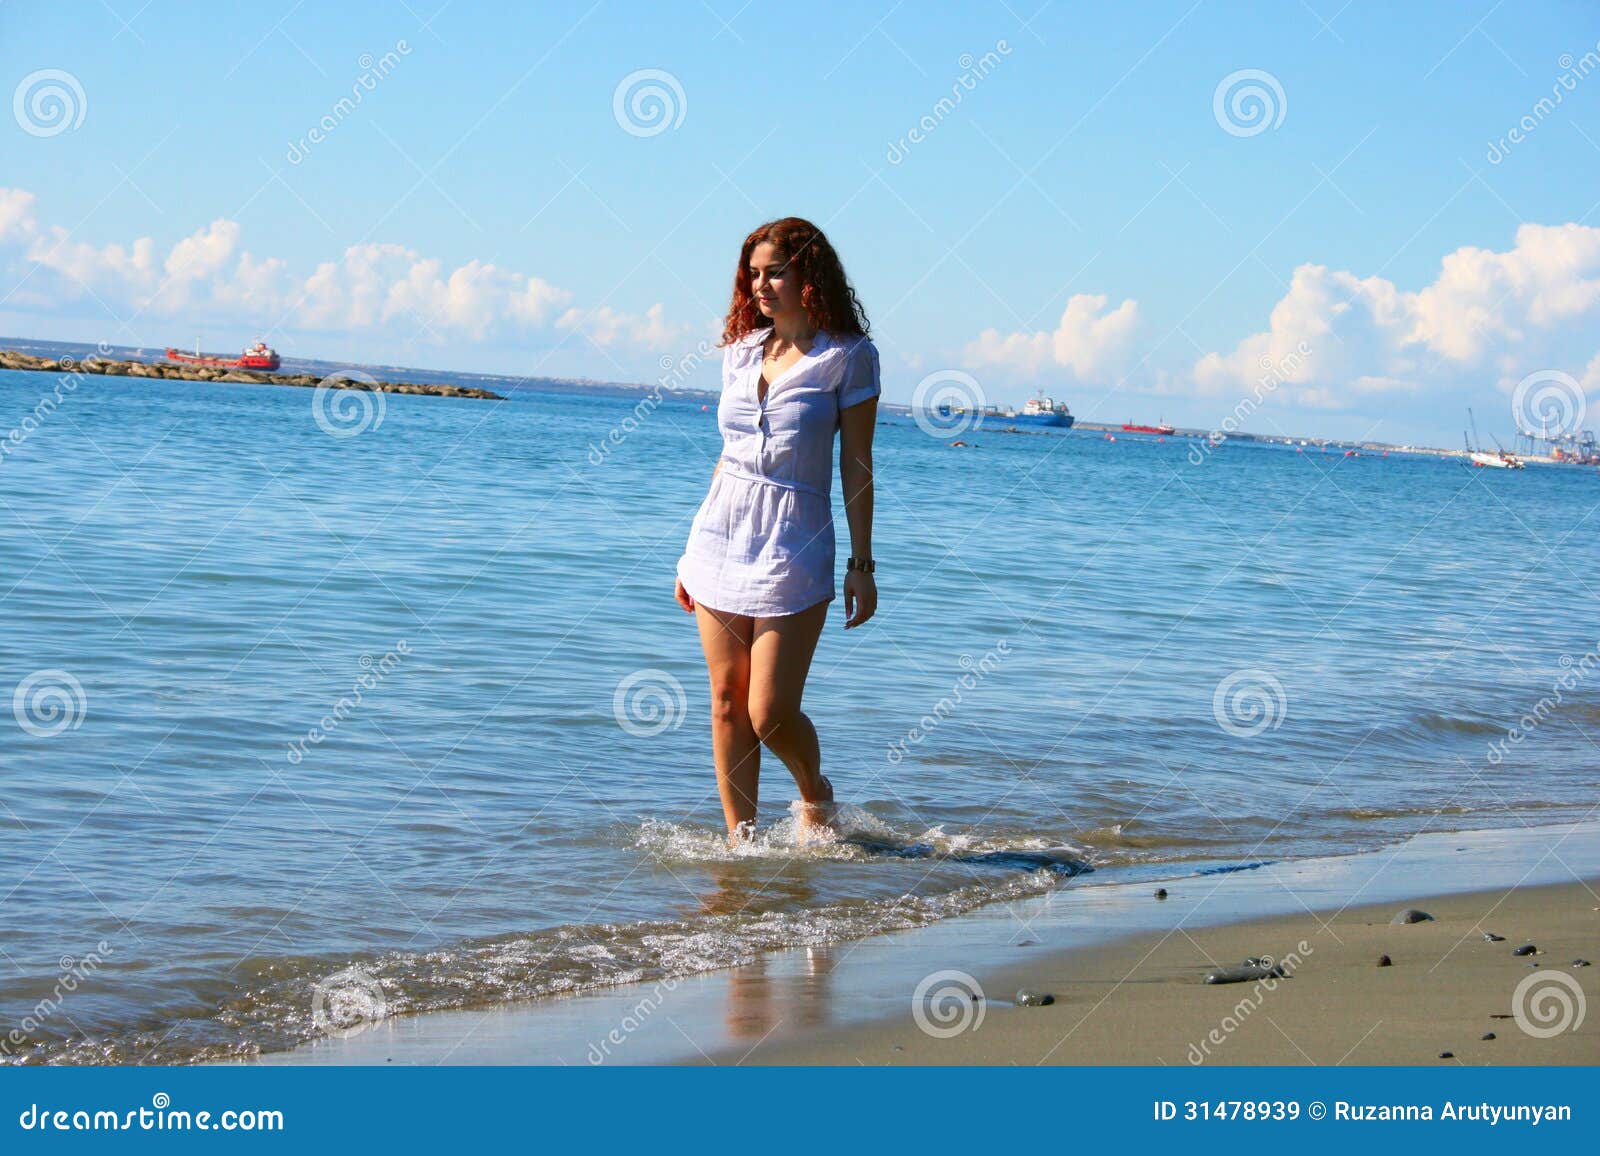 Woman On Beach Royalty Free Stock Images - Image: 31478939